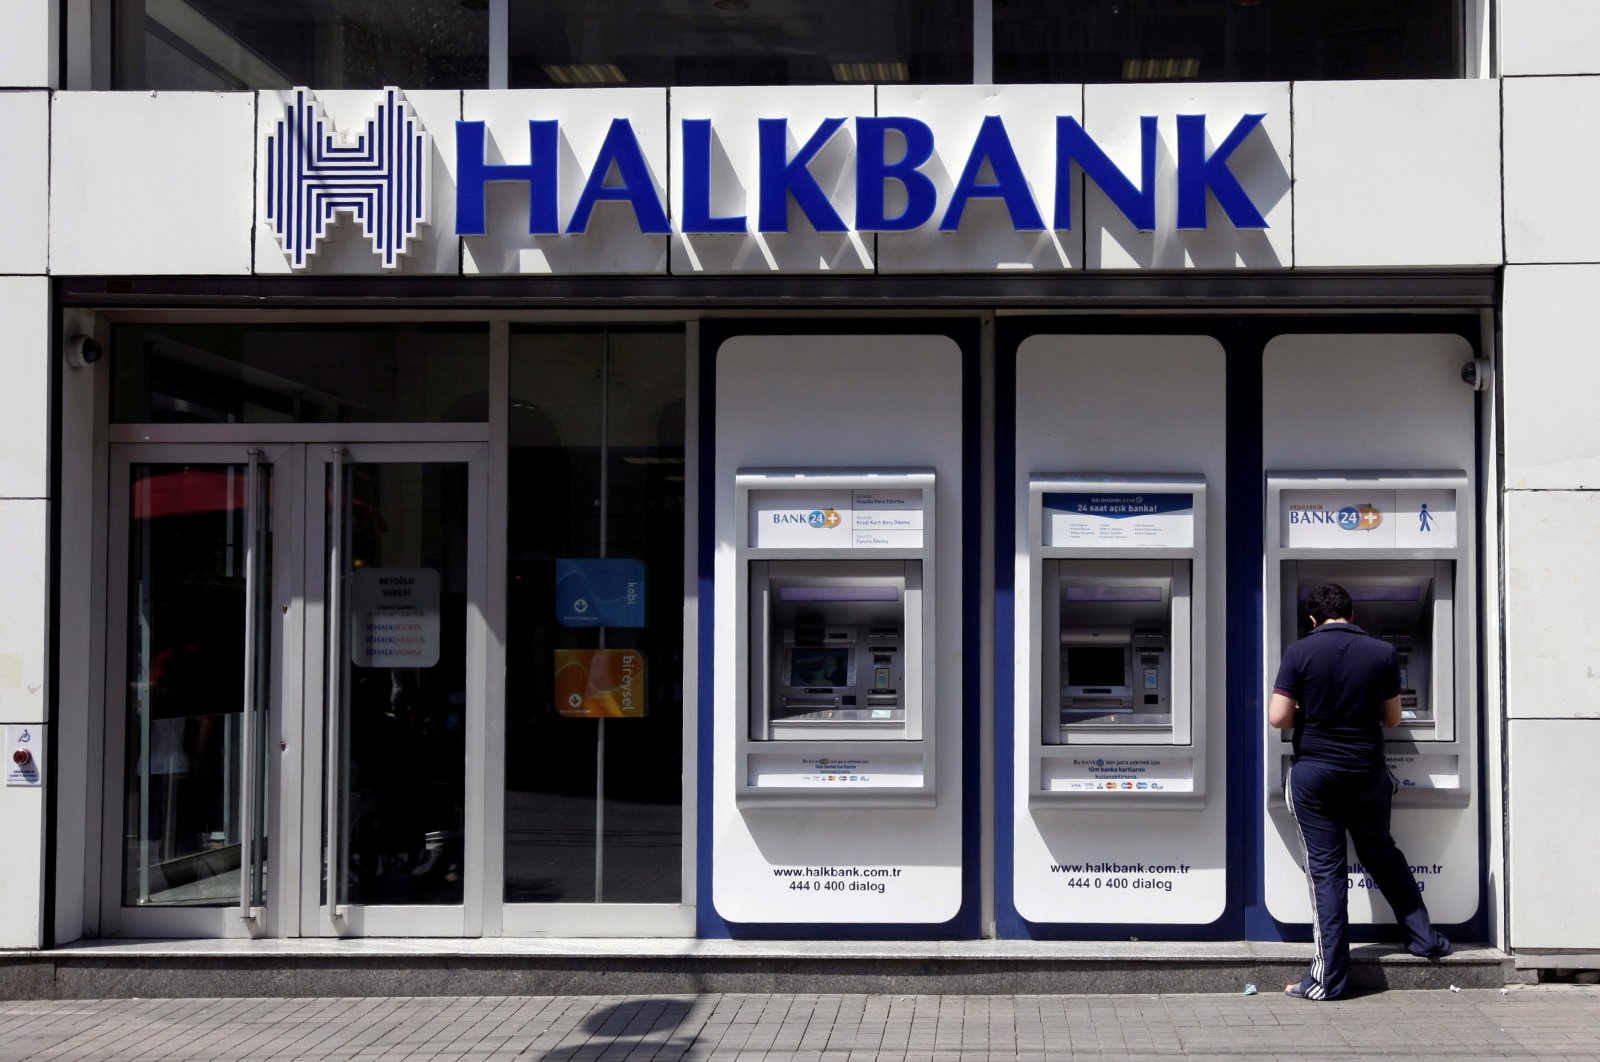 A customer uses an automated teller machine at a branch of Halkbank in Istanbul, Turkey, Aug. 15, 2014. (Reuters Photo)